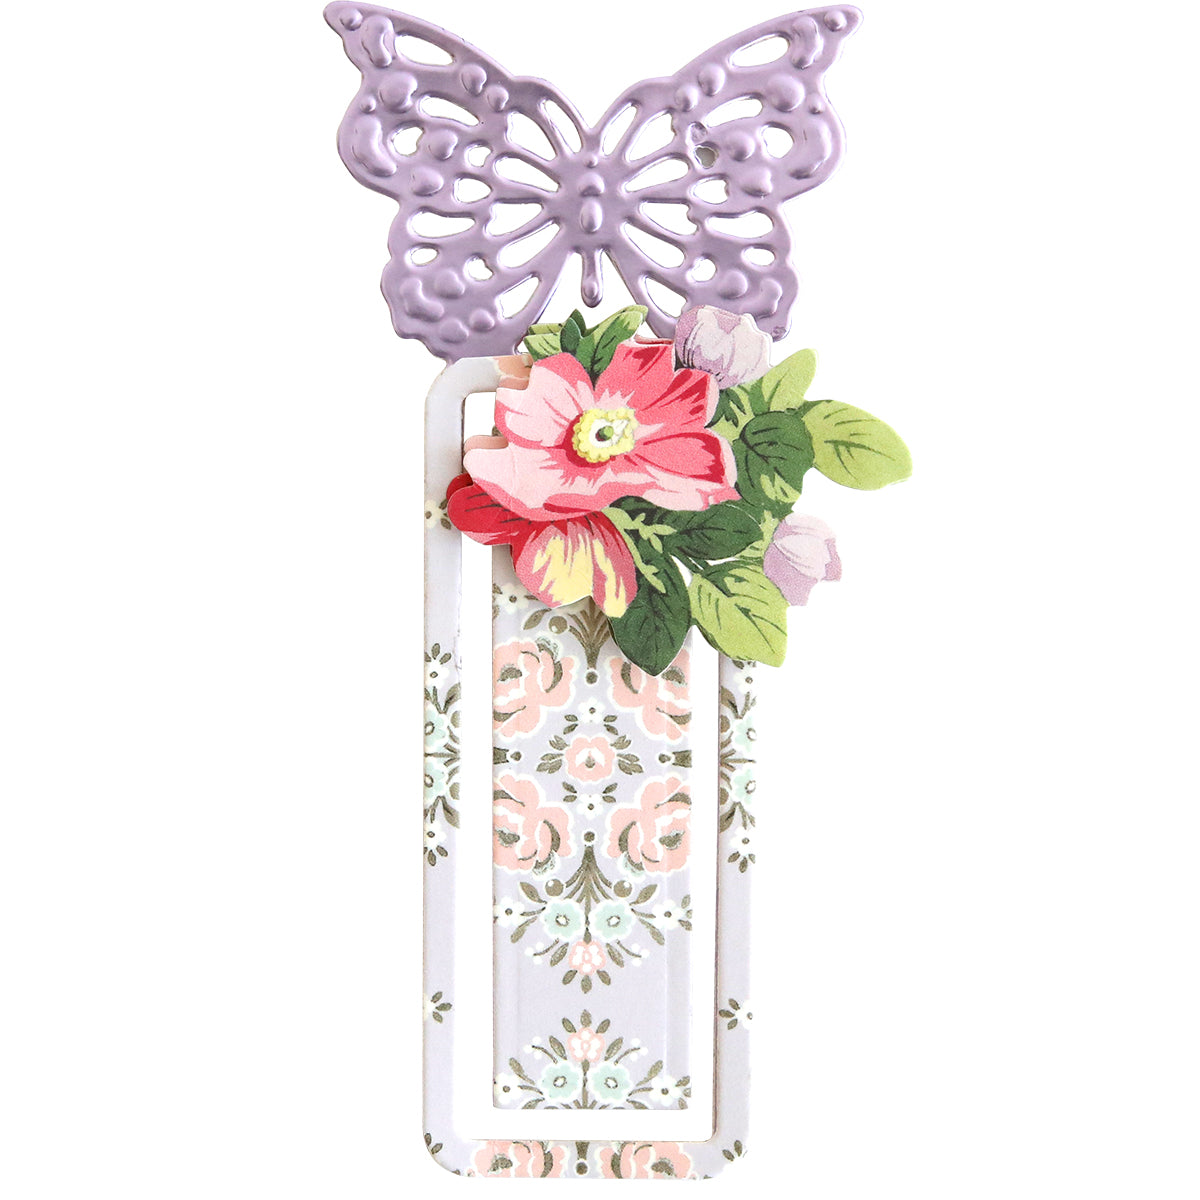 A custom Bookmark Dies with a butterfly and flowers on it.